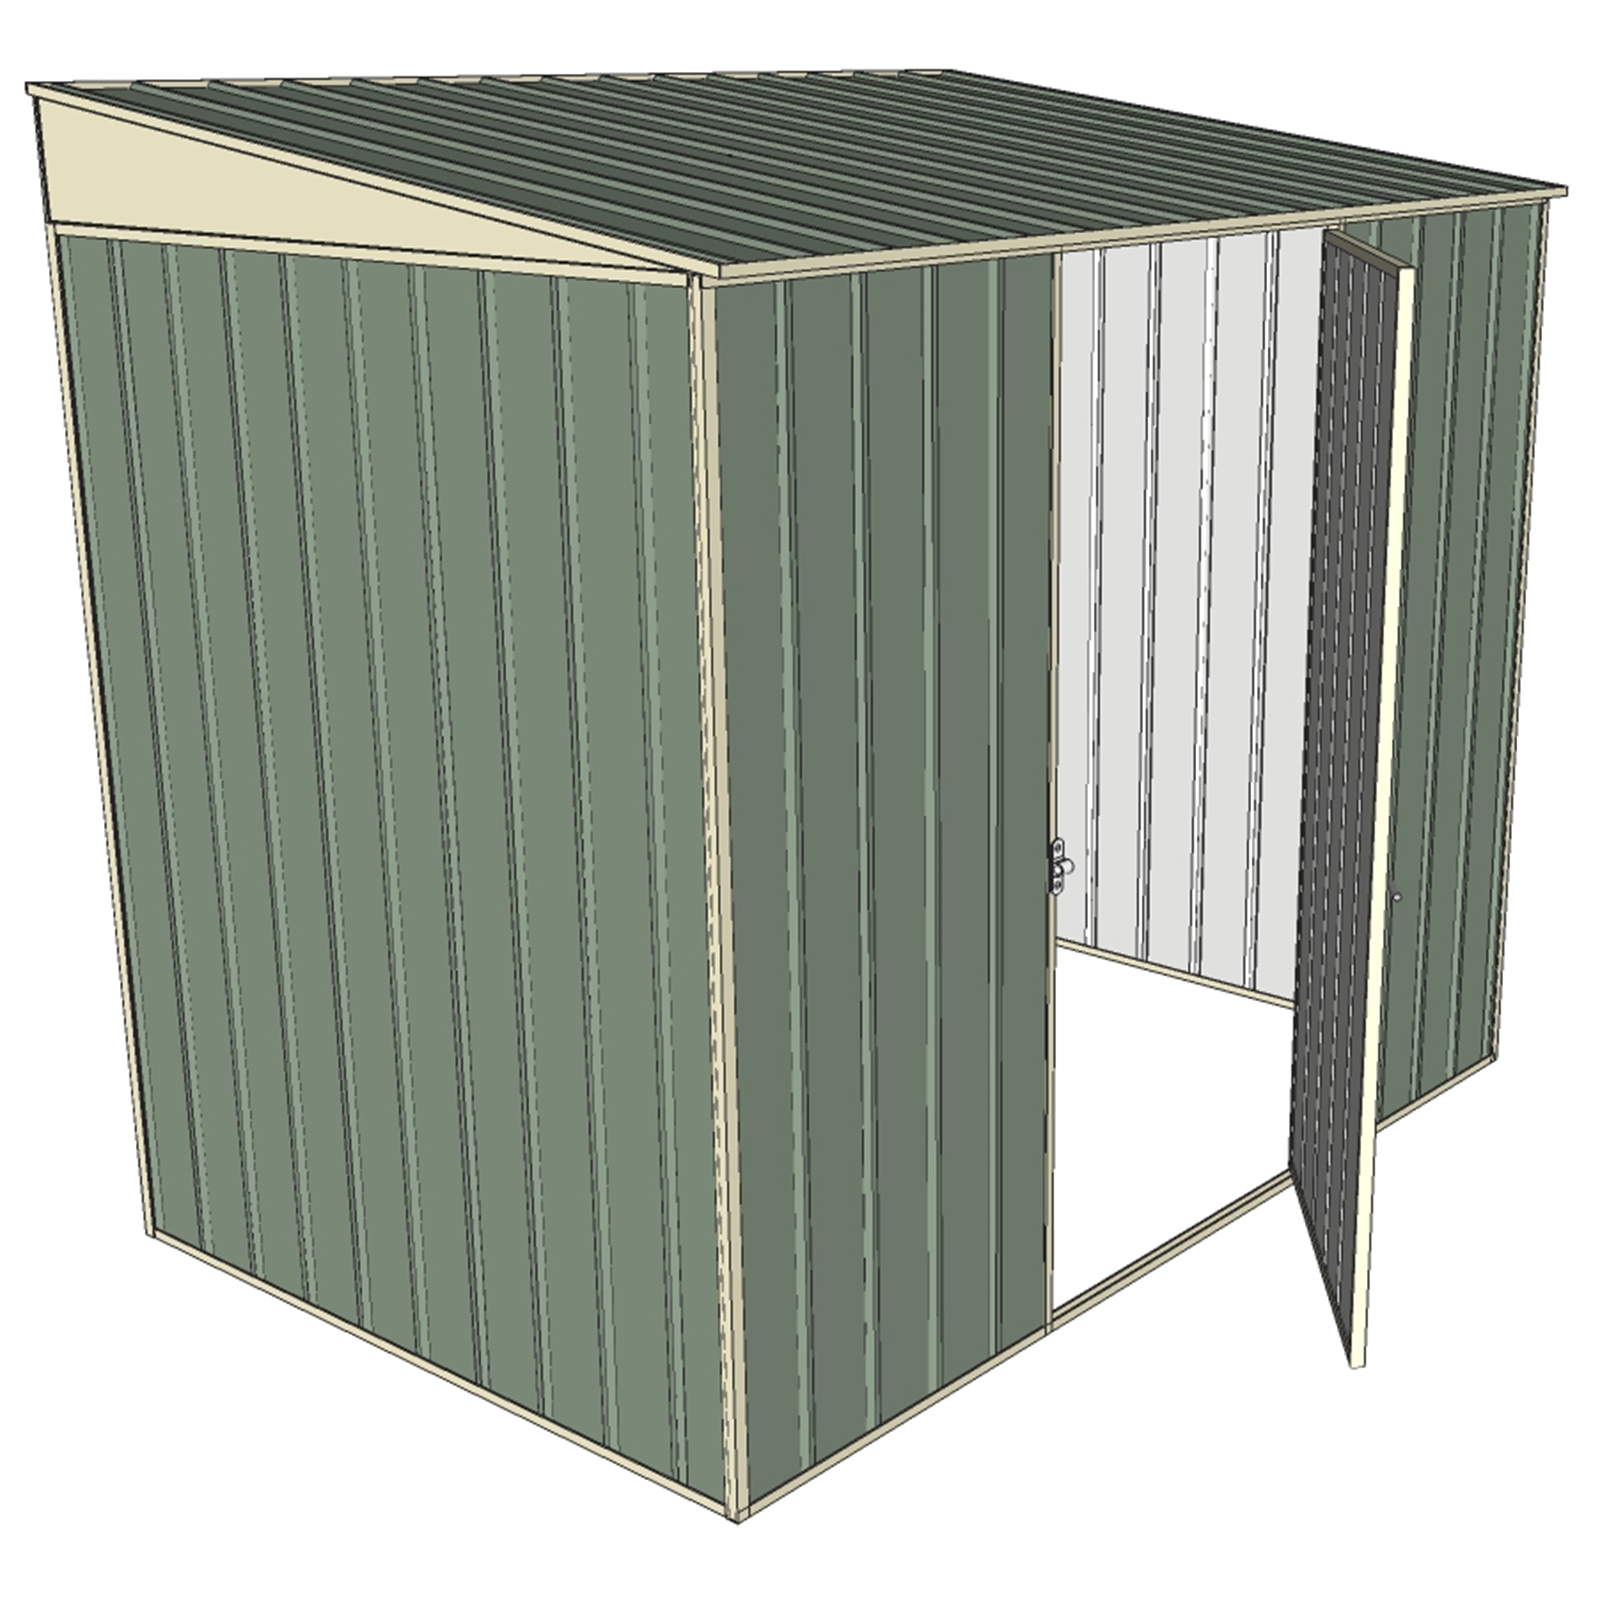 Build-a-Shed 2.3 x 1.5 x 2.0m Green Skillion Single Hinged Door Narrow Shed